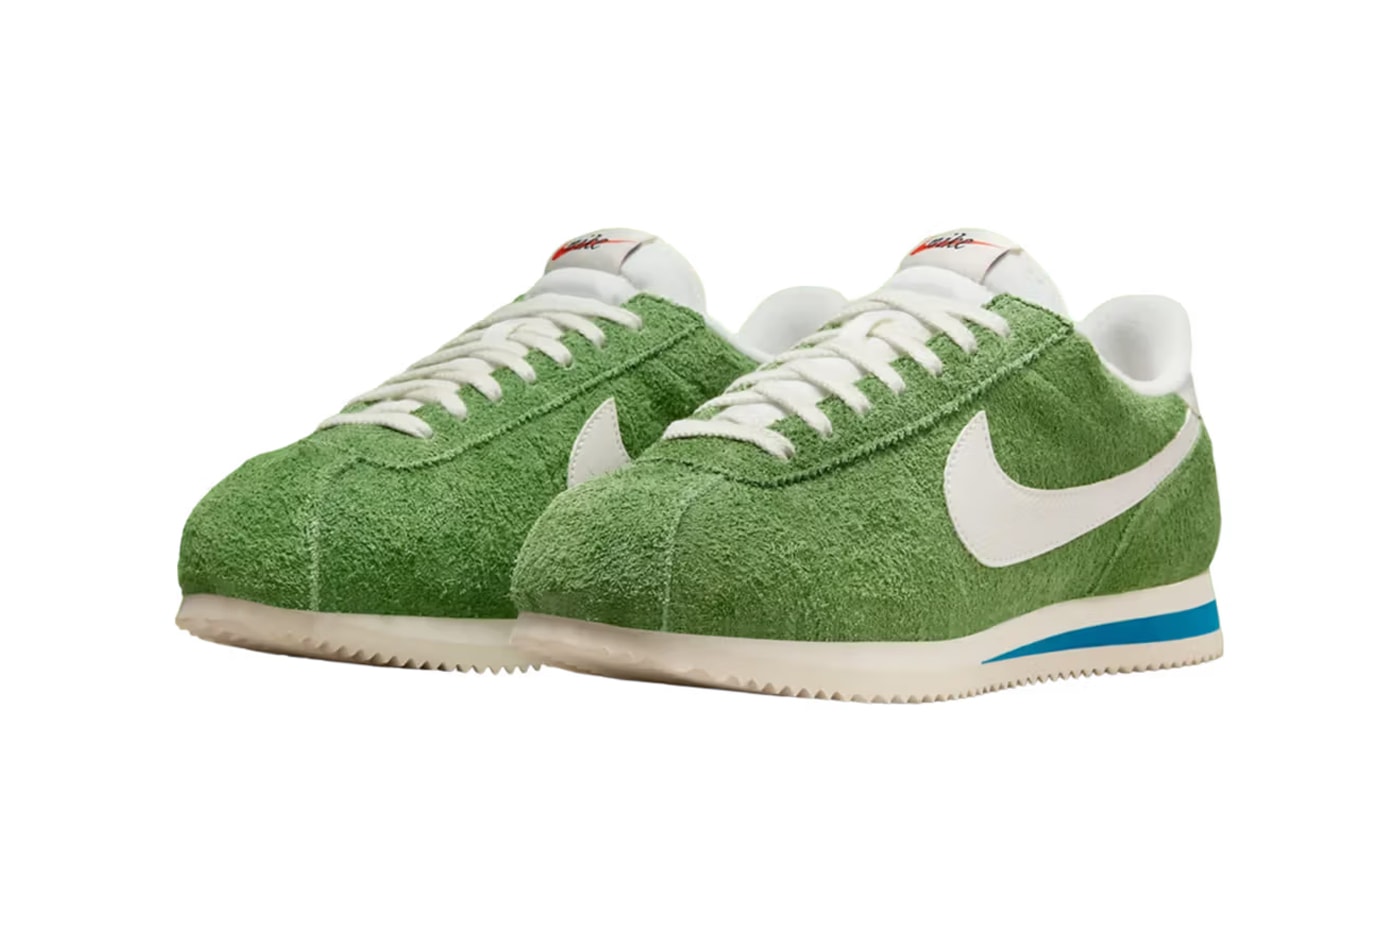 Nike Textured Suede Cortez Grass Green Shade color release details price team red women's shoe trainer photos preview